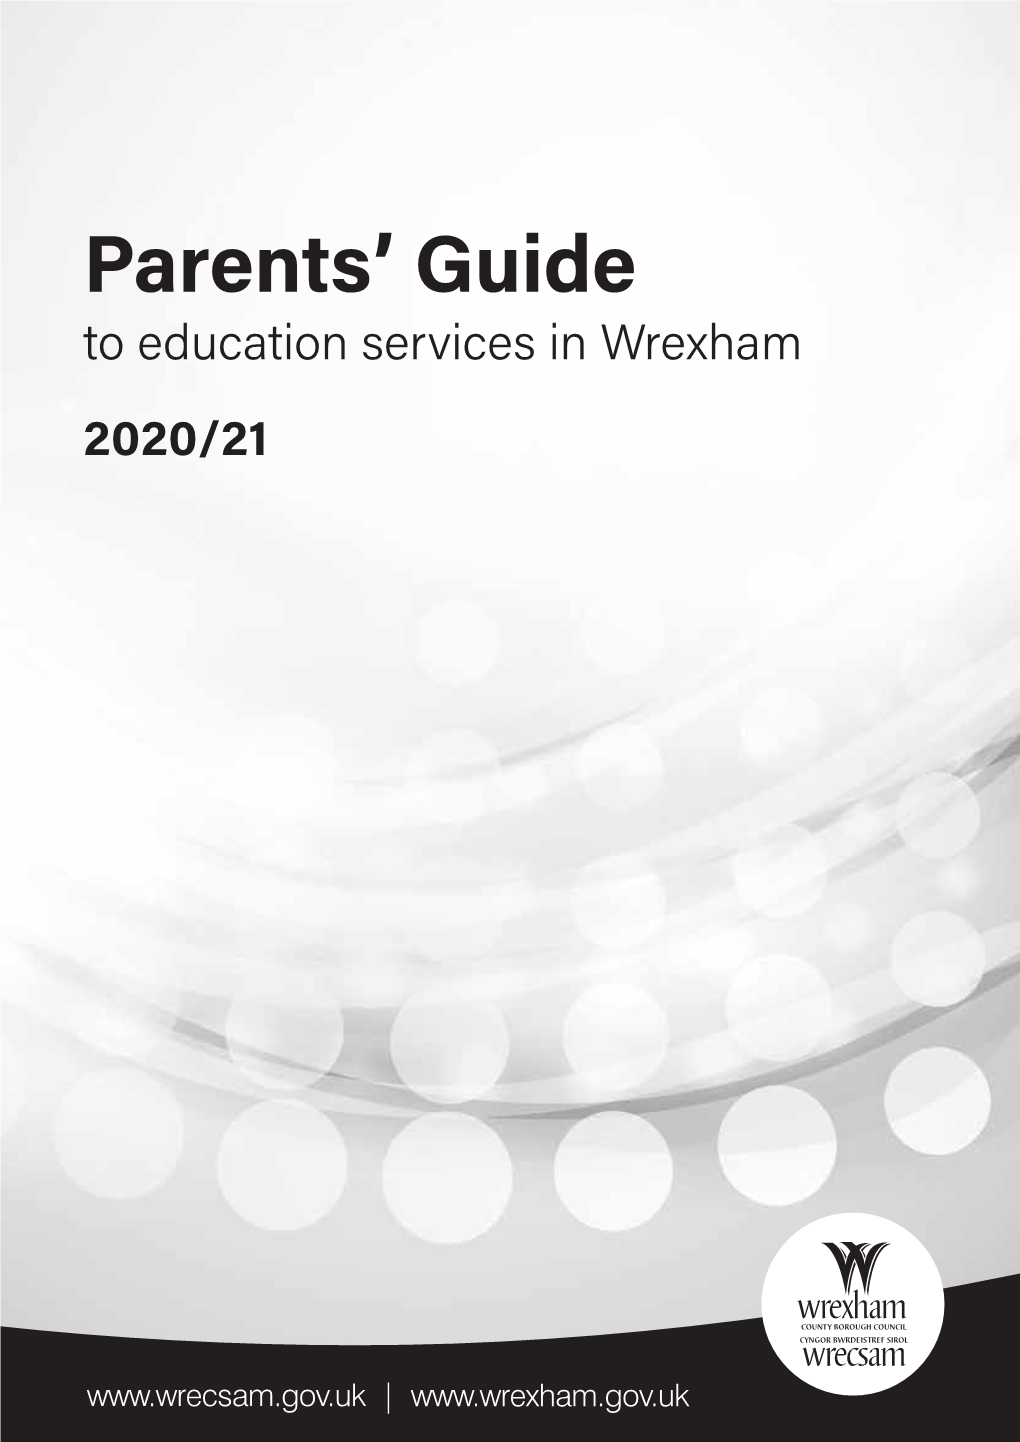 Parents' Guide to Education Services in Wrexham